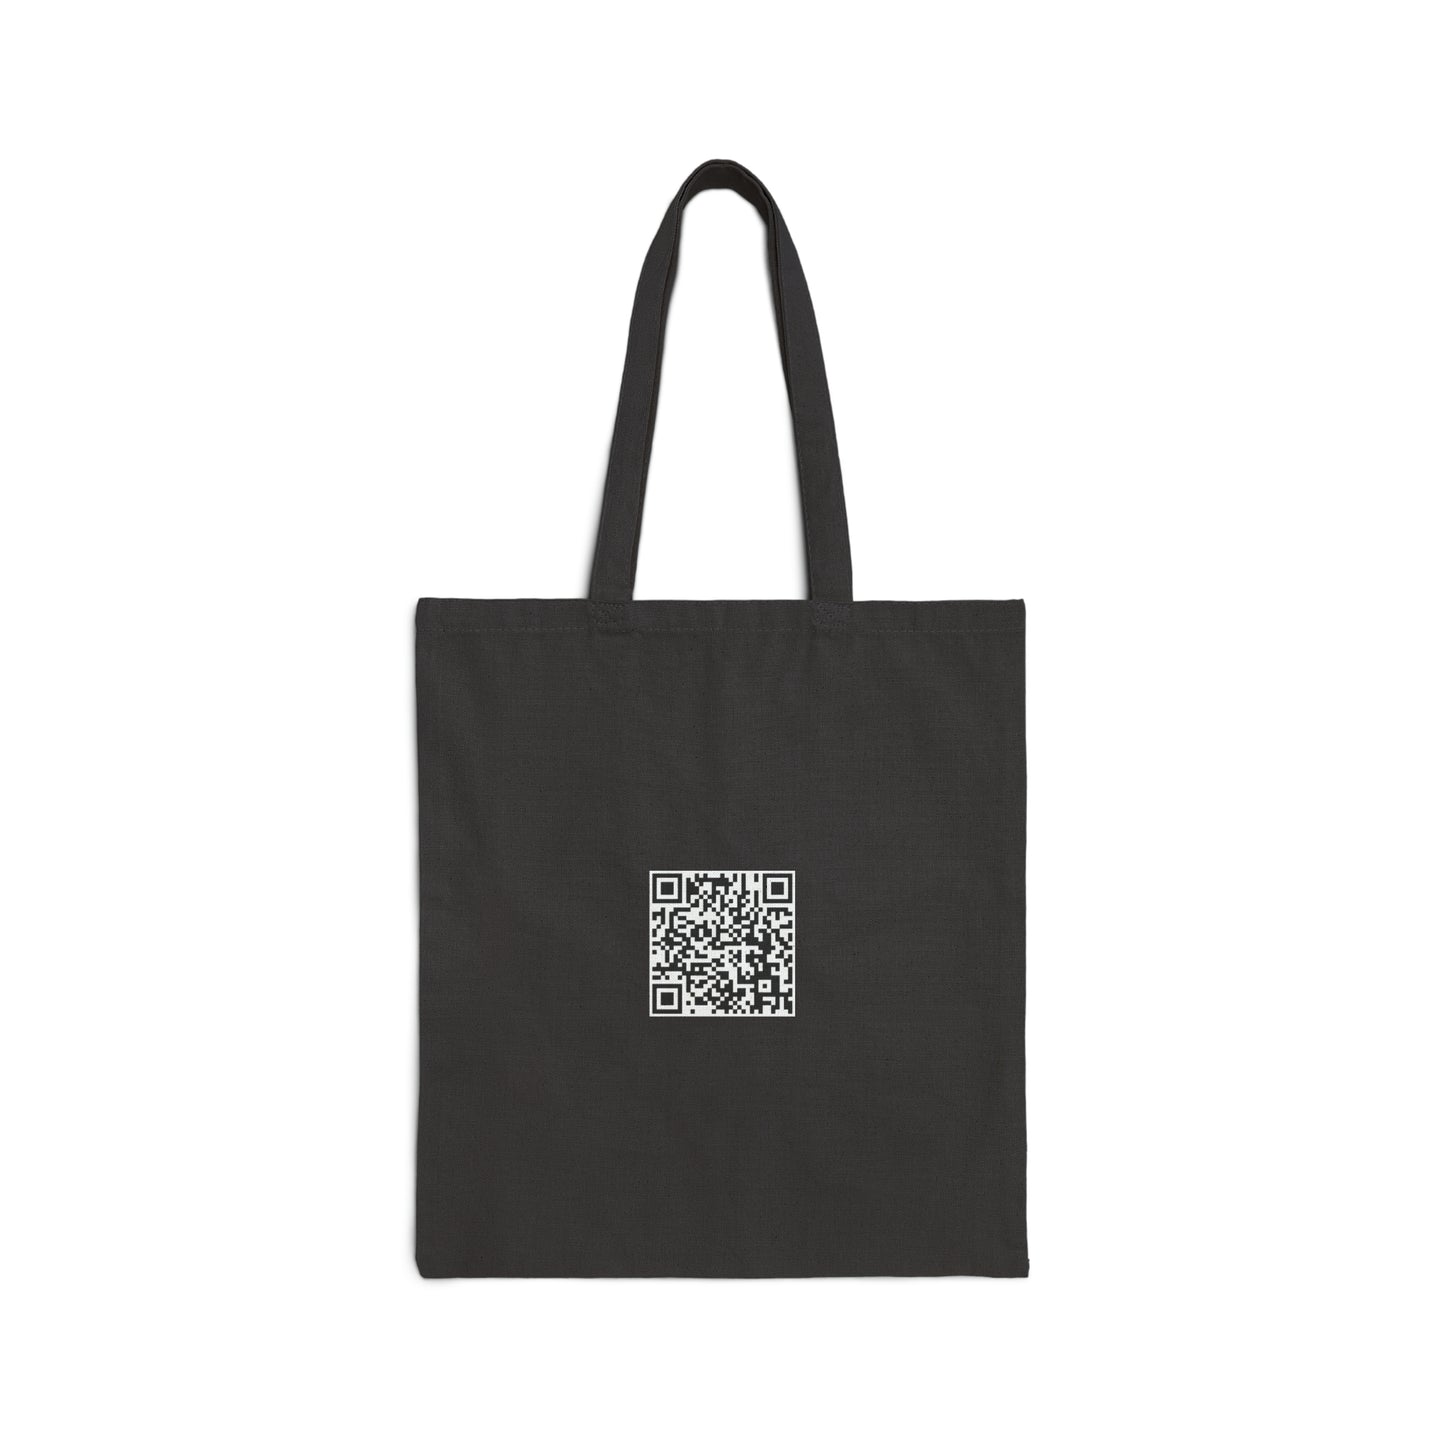 It Lives Under My Bed - Cotton Canvas Tote Bag